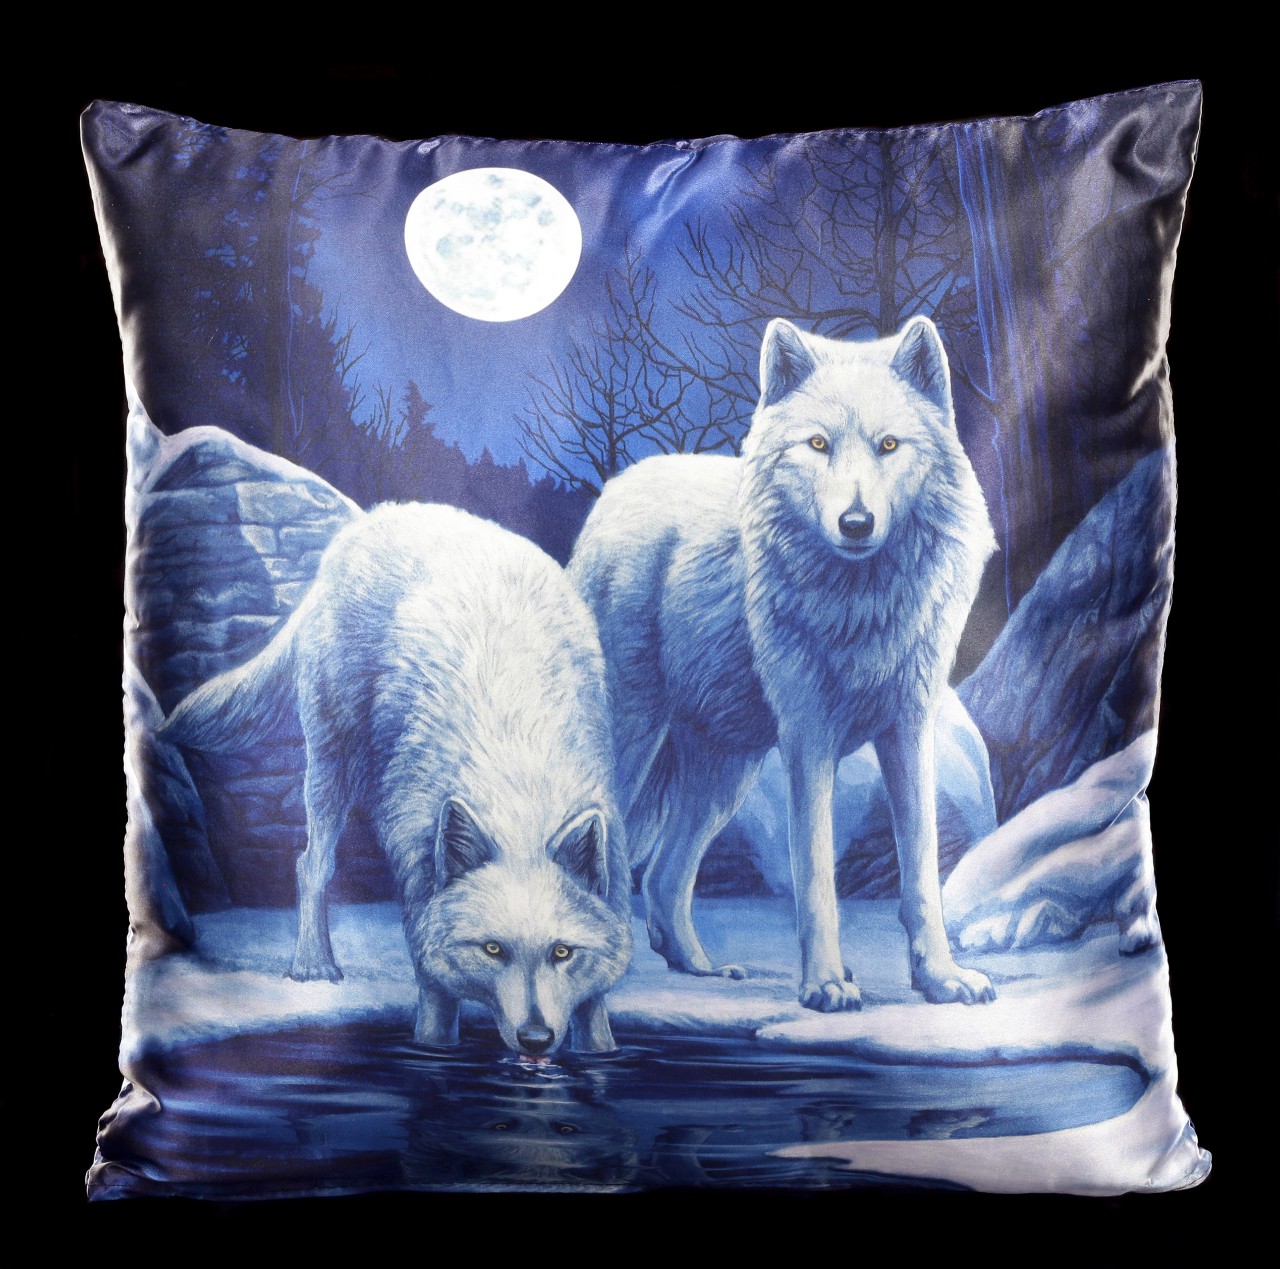 Cushion with Wolves - Warriors of Winter